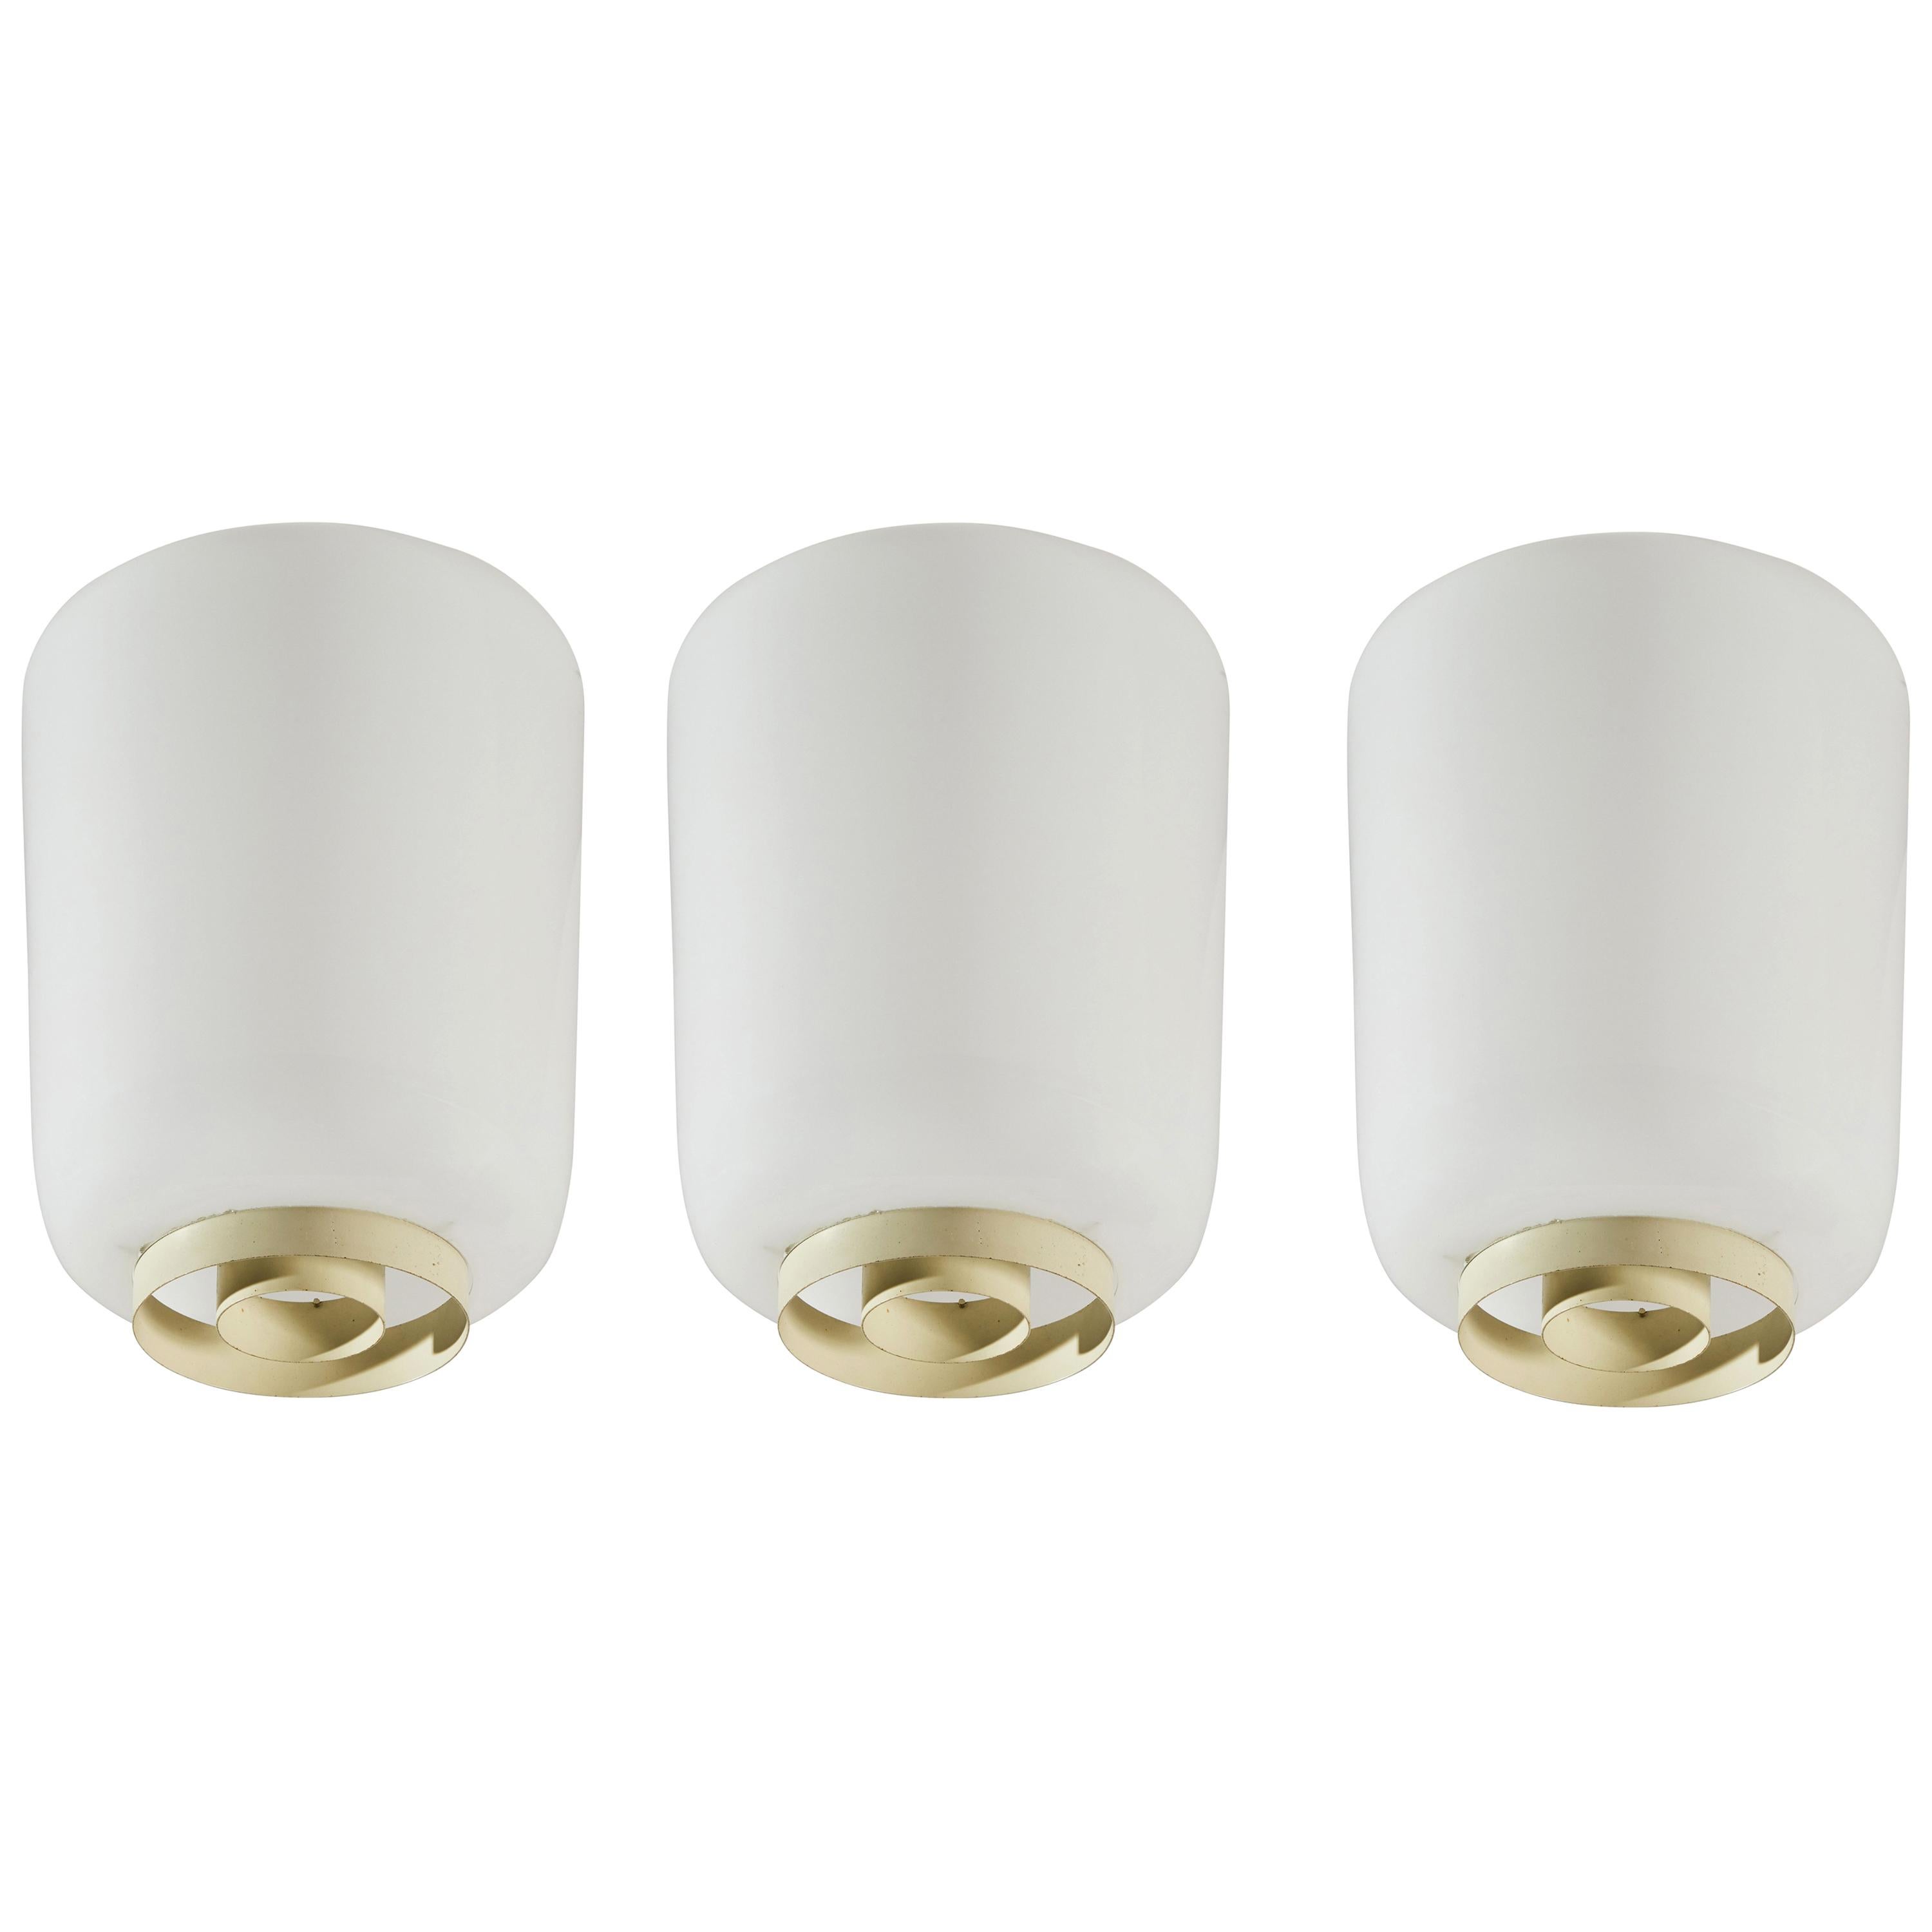 Three Model 71-144 Flush Mount Ceiling Lights by Lisa Johansson-Pape for Orno